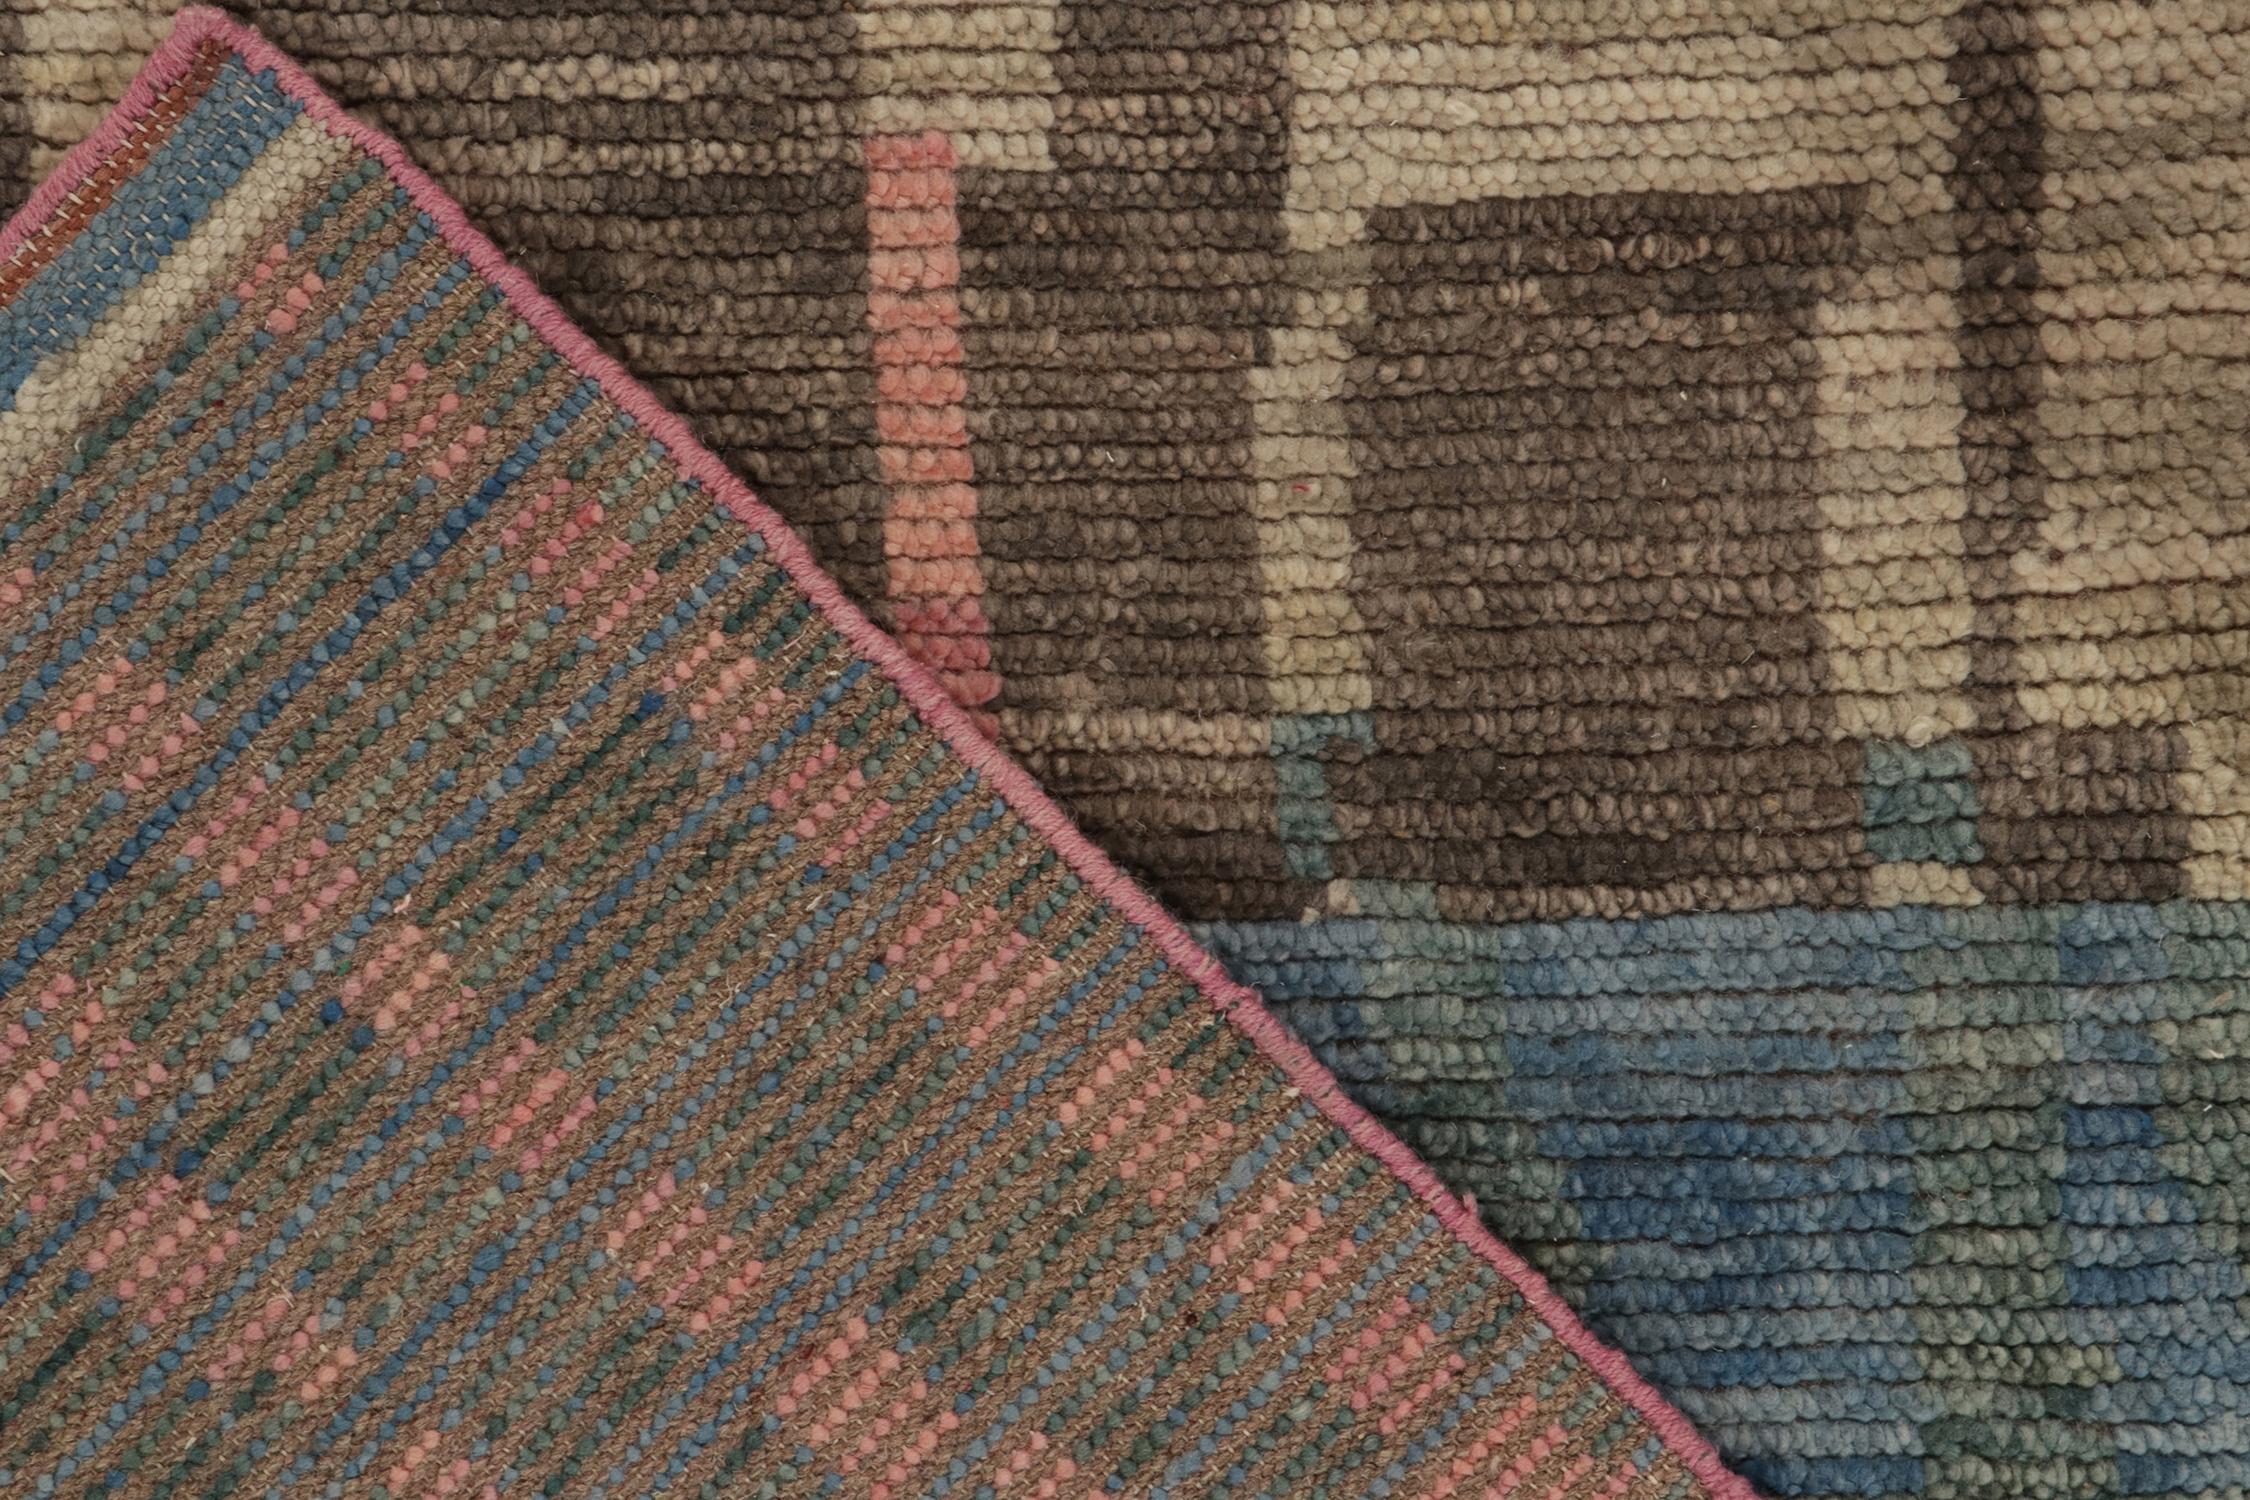 Contemporary Rug & Kilim’s Moroccan Style Rug in Pink, Blue & Beige-Brown Geometric Patterns For Sale